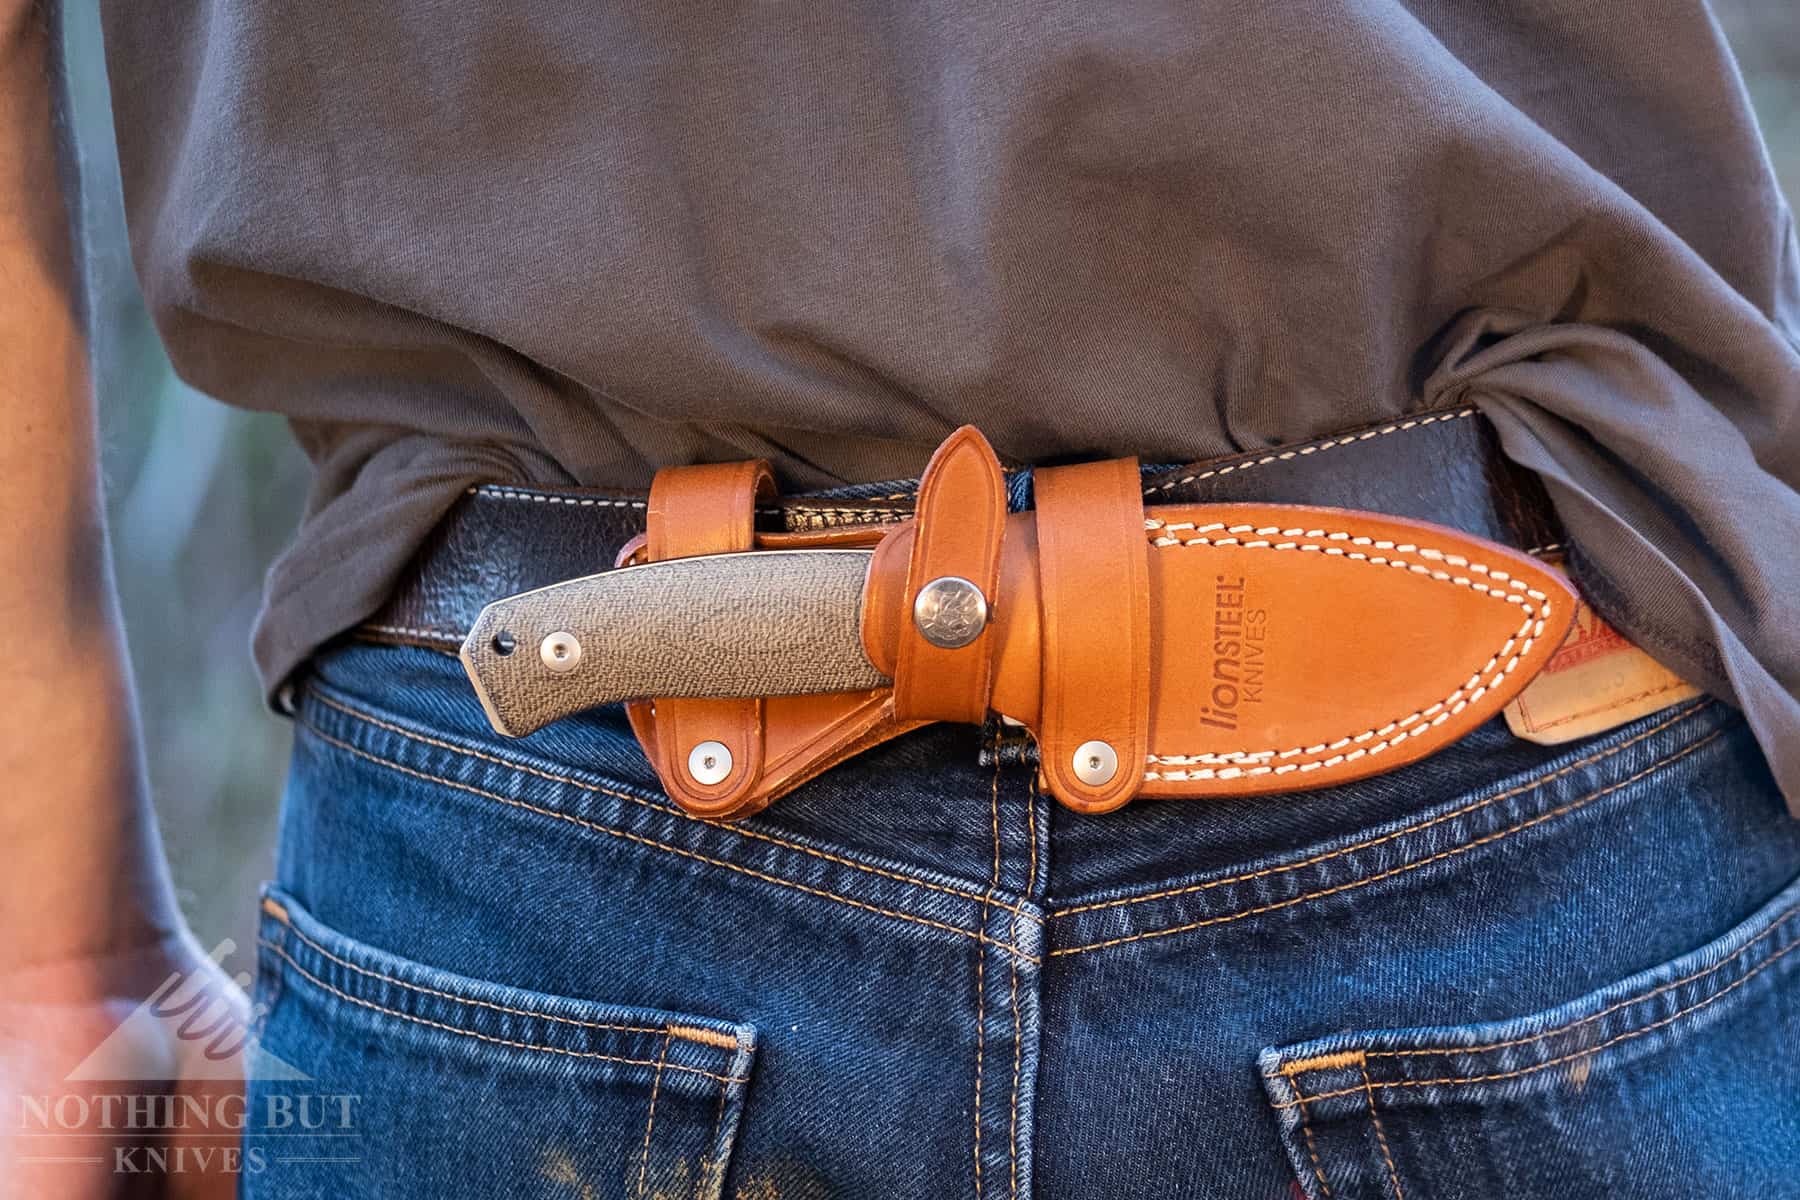 https://www.nothingbutknives.com/wp-content/uploads/2018/04/Scout-Carry-with-the-LionSteel-M2M.jpg